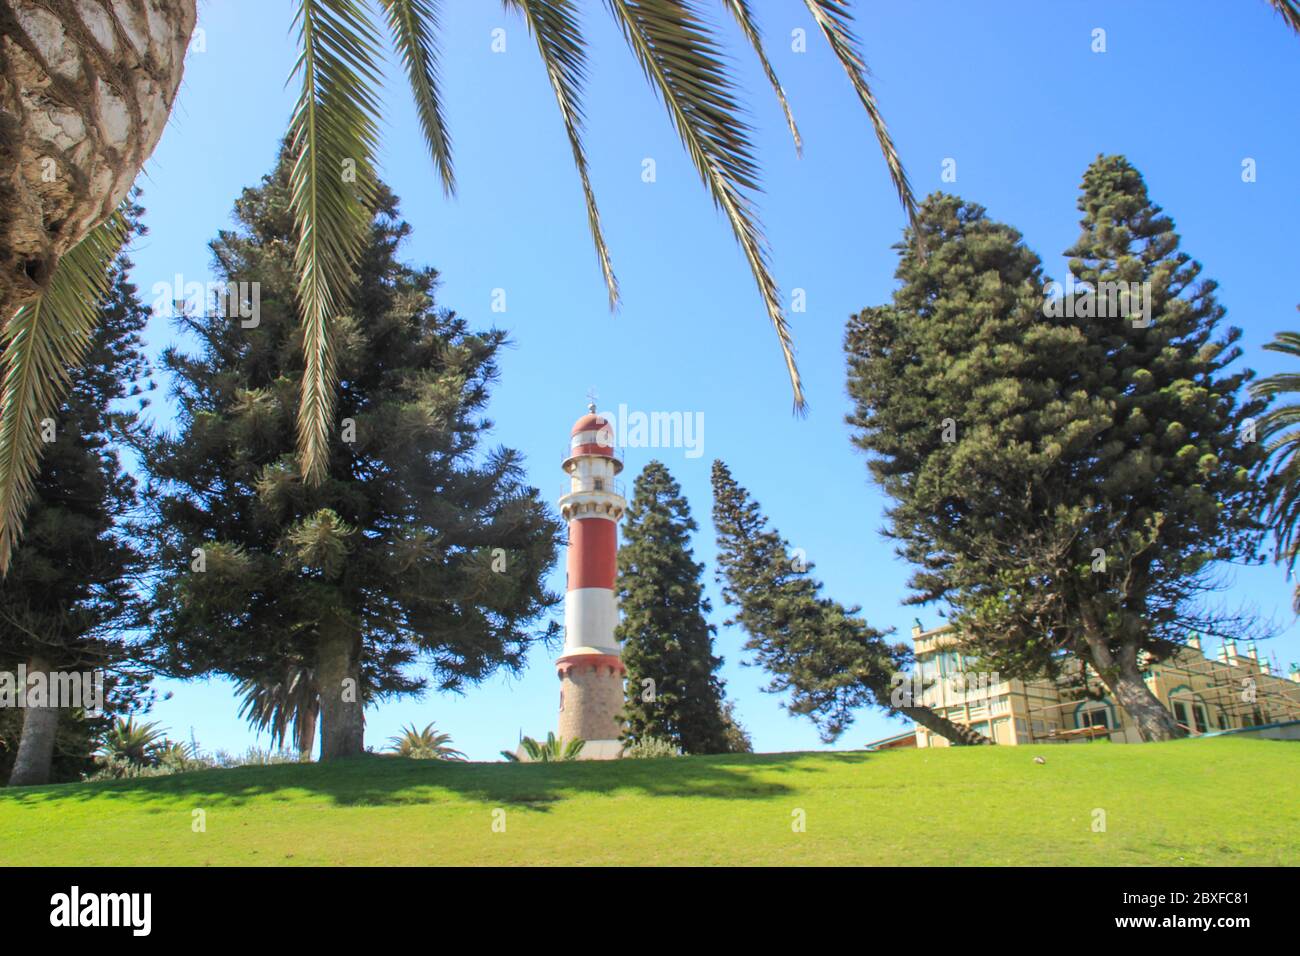 Swakopmund, Namibia - April 18, 2015: Old German red and white lighthouse, which is called 'bacon' surrounded by palm trees Stock Photo